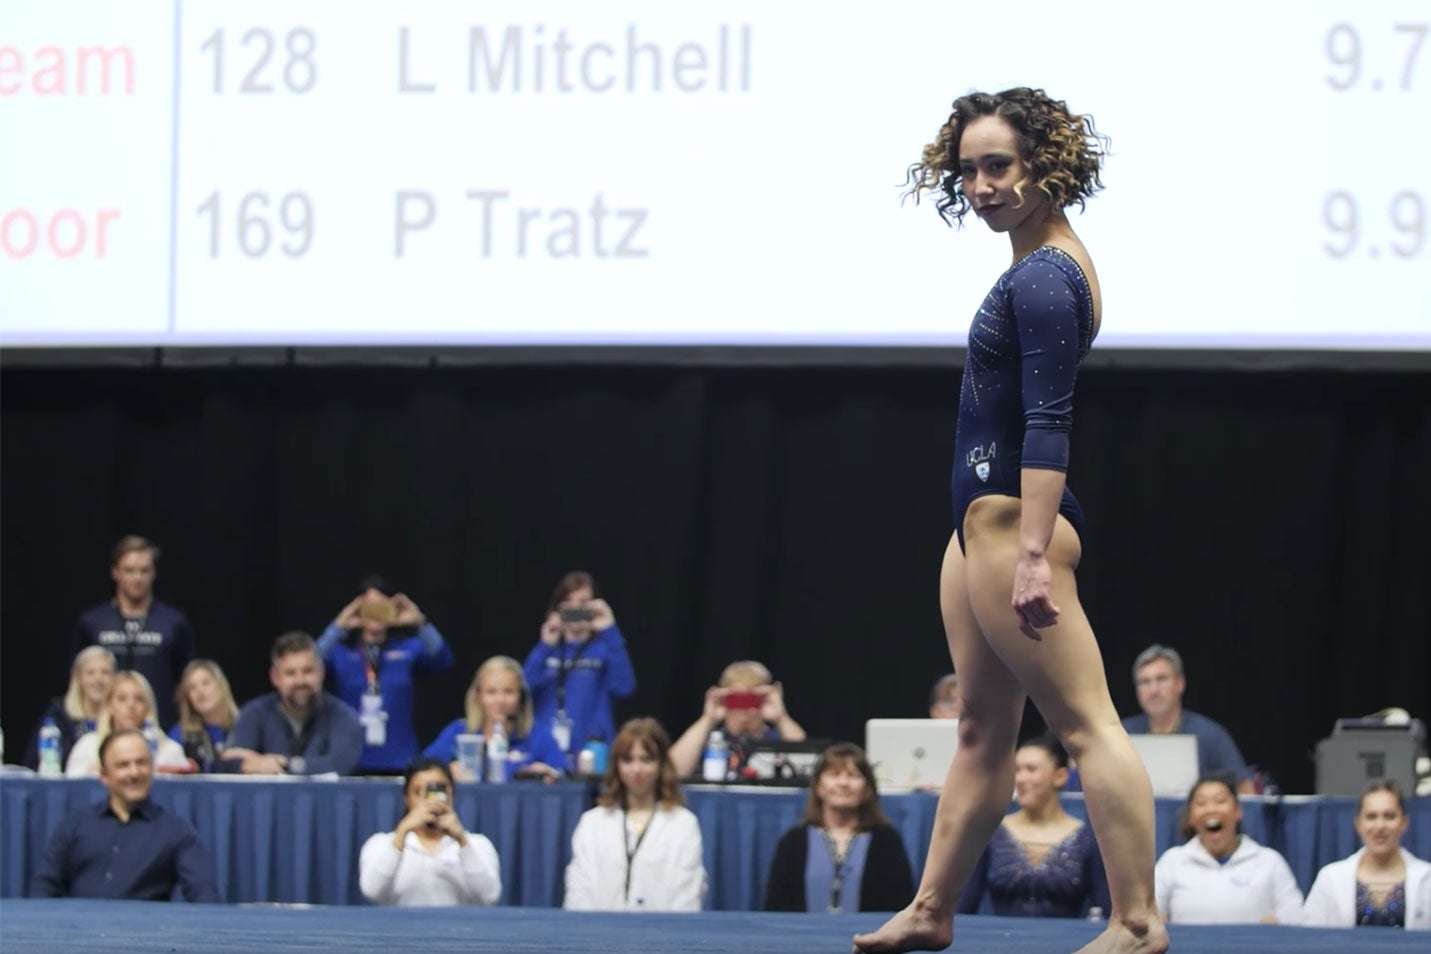 Katelyn Ohashi throws a sassy expression directly at the camera at the end of her floor exercise routine.